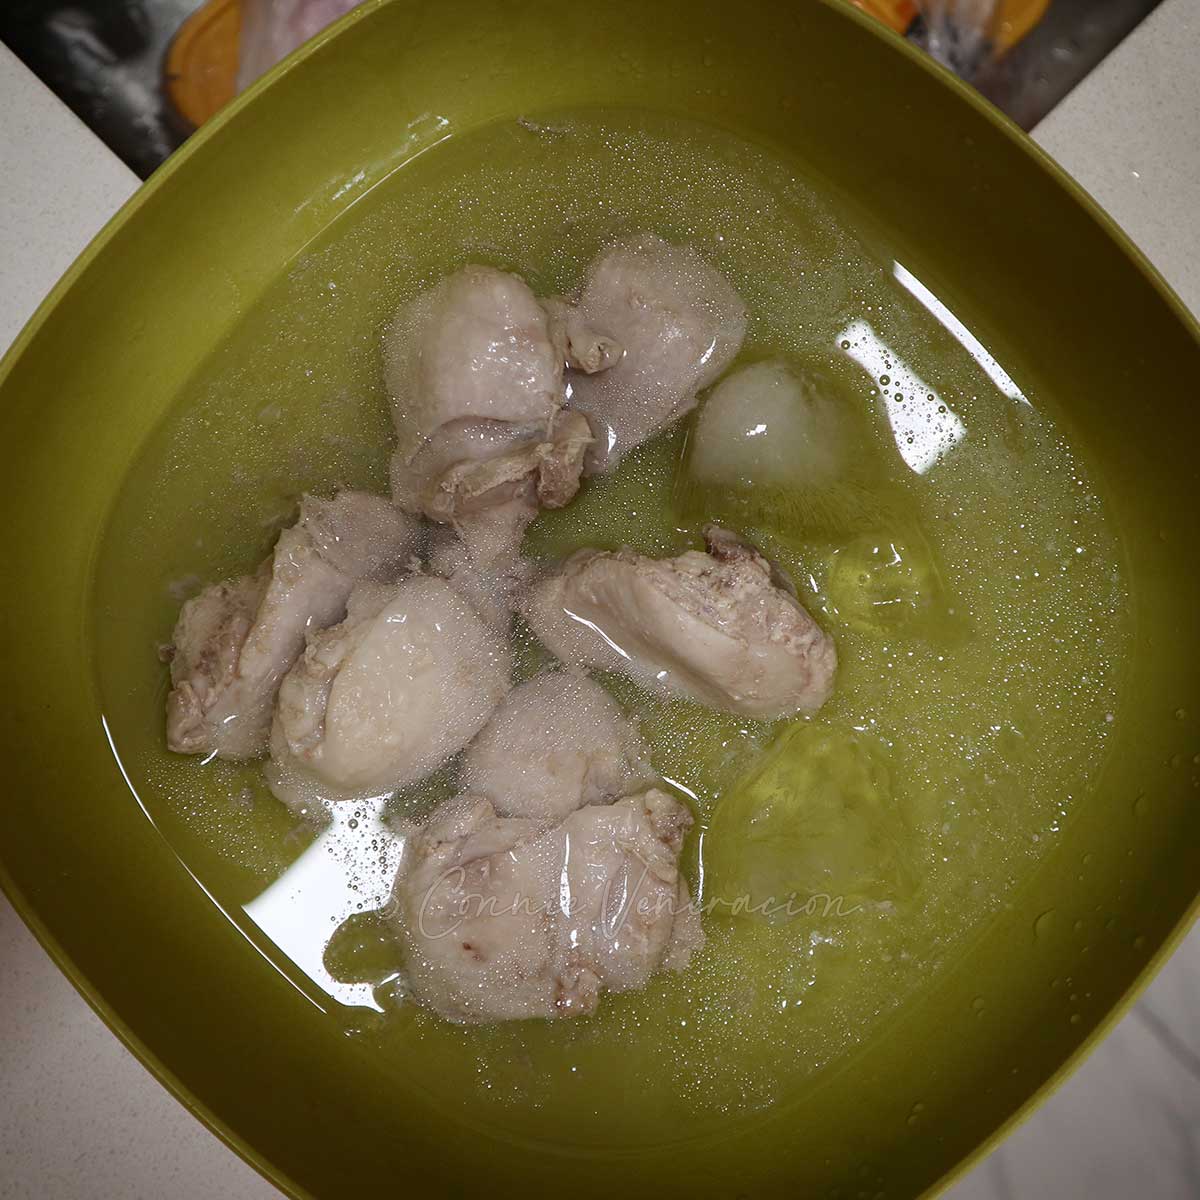 Cooling poached chicken in iced water